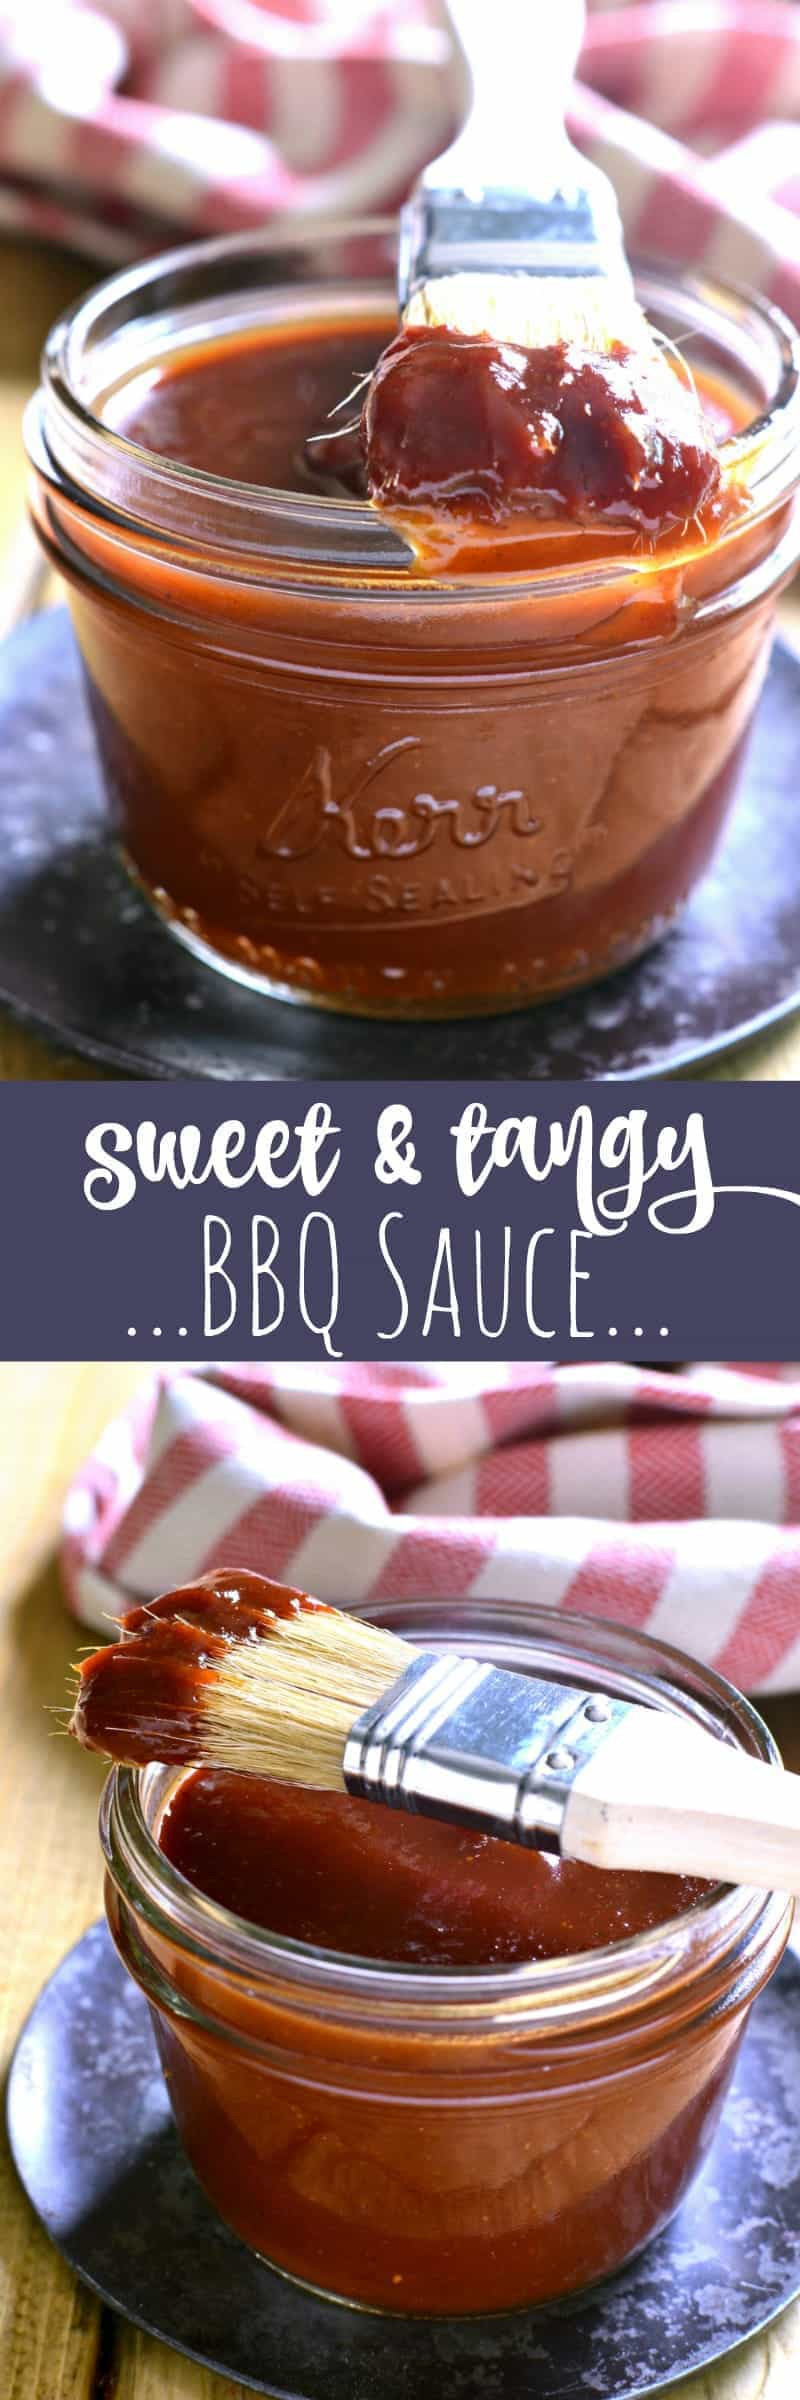 22 Ideas for Tangy Bbq Sauce - Best Recipes Ideas and Collections